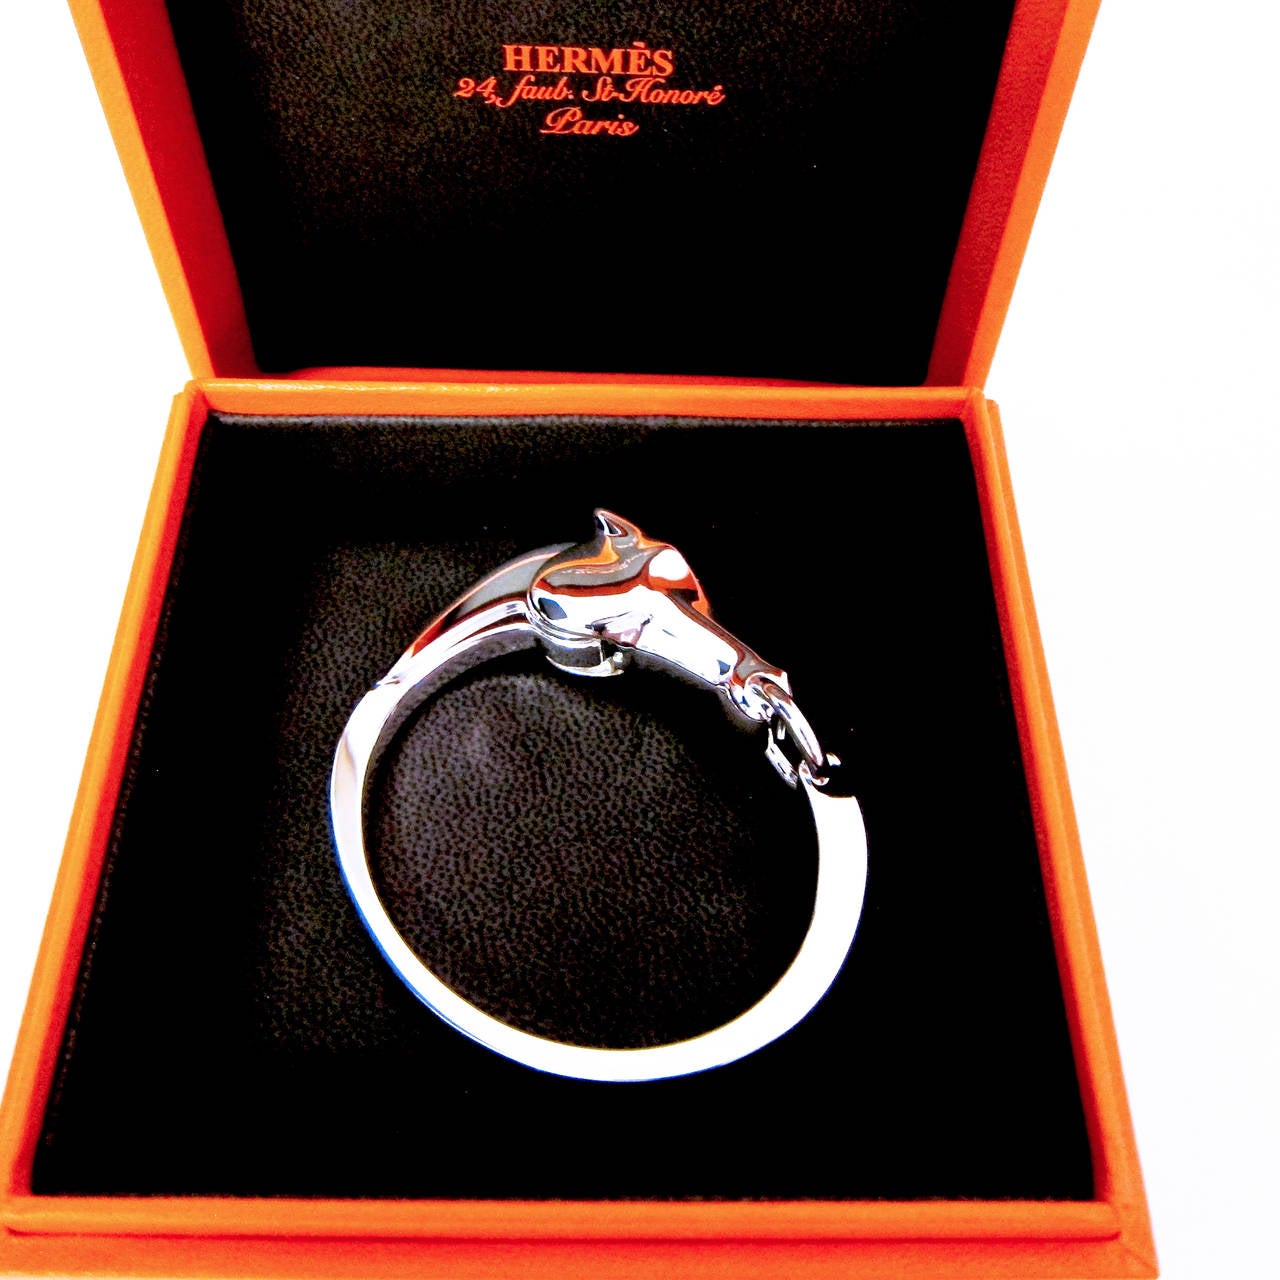 HERMES GALOP BRACELET PM SOLID STERLING SILVER AG925
*Perfect Gift!  Brand New in Box!  Never Worn.  
Size Small (Short).  
Brand New in Box
Comes with Hermes box, Hermes ribbon, and gift bag (upon request).  
Features Hermes' modern rendition